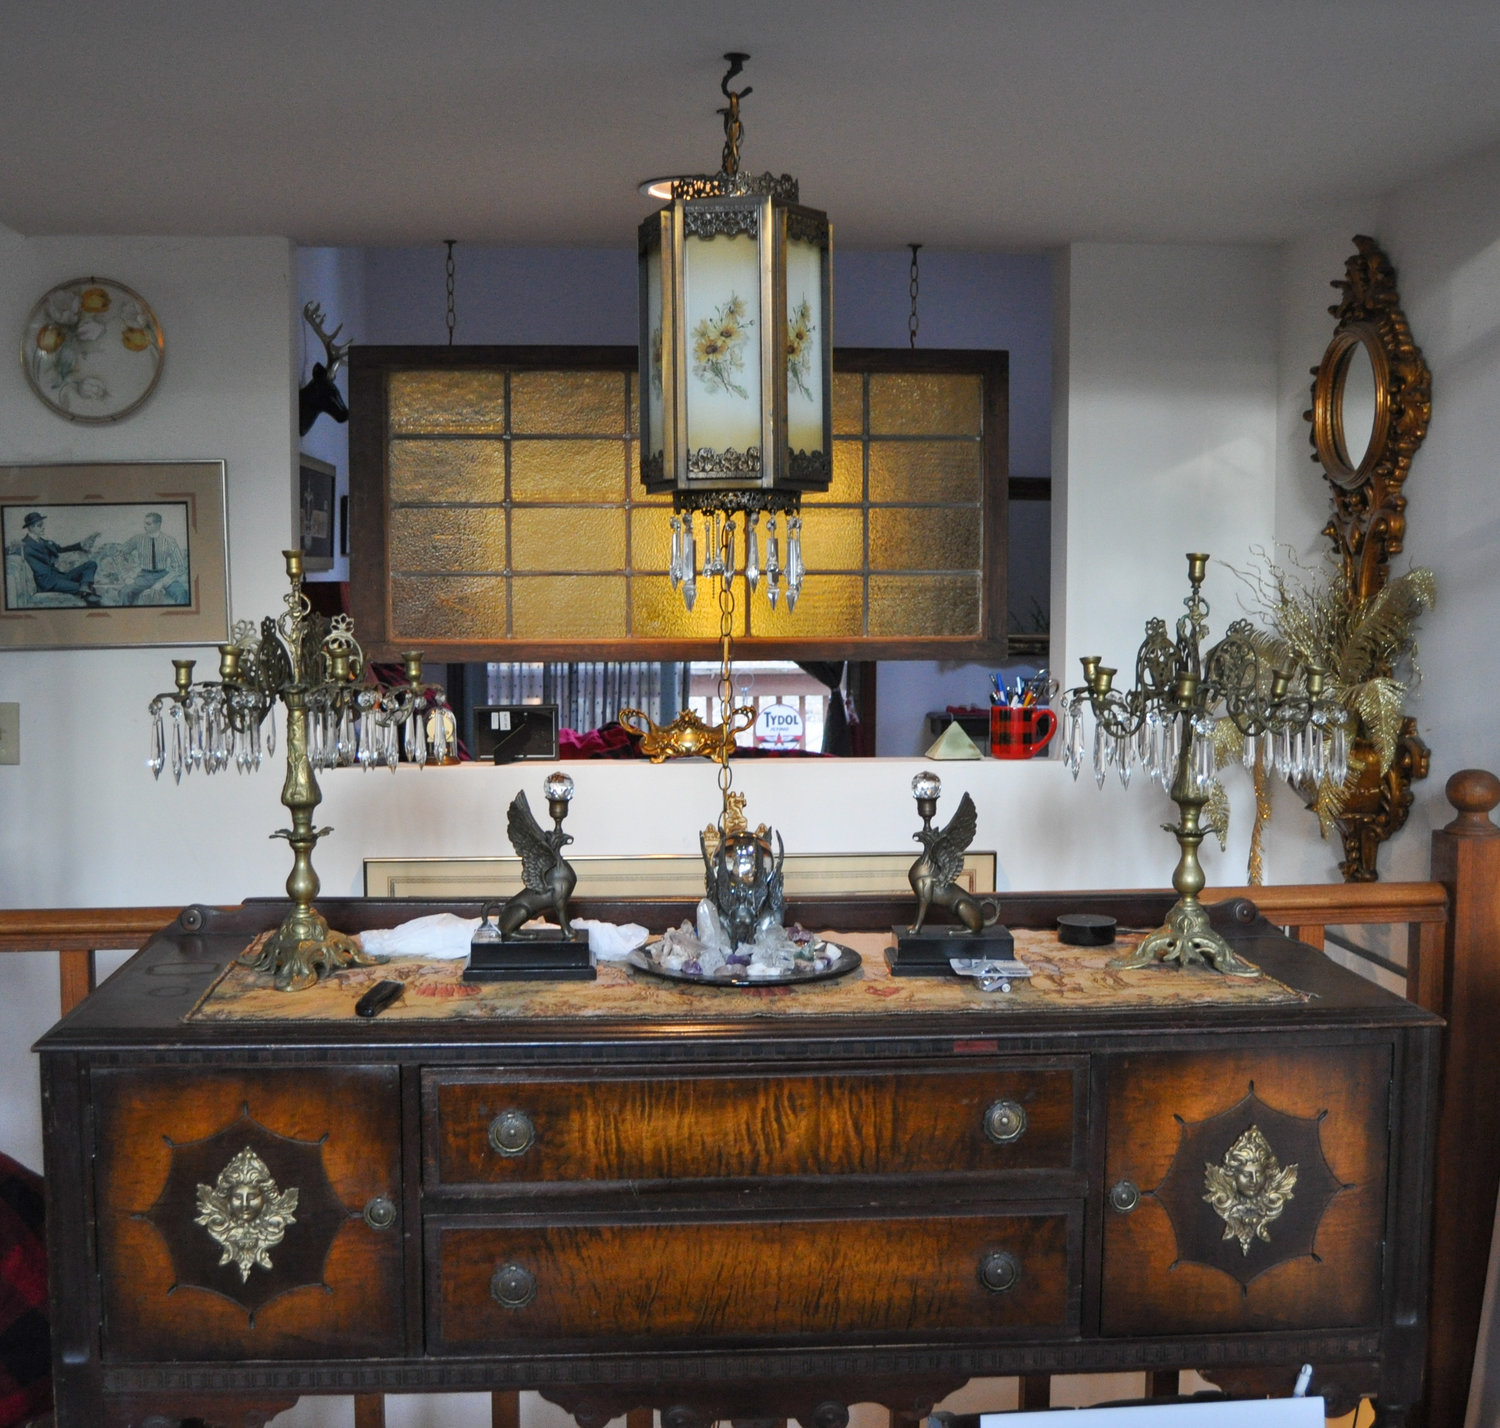 This antique sideboard serves as a beautiful surface for my Baroque candelabrum, a pair of handmade bronze griffins and my collection of crystals, gathered over many years from my travels around the globe. Be it ever so humble, this is my home sweet home.